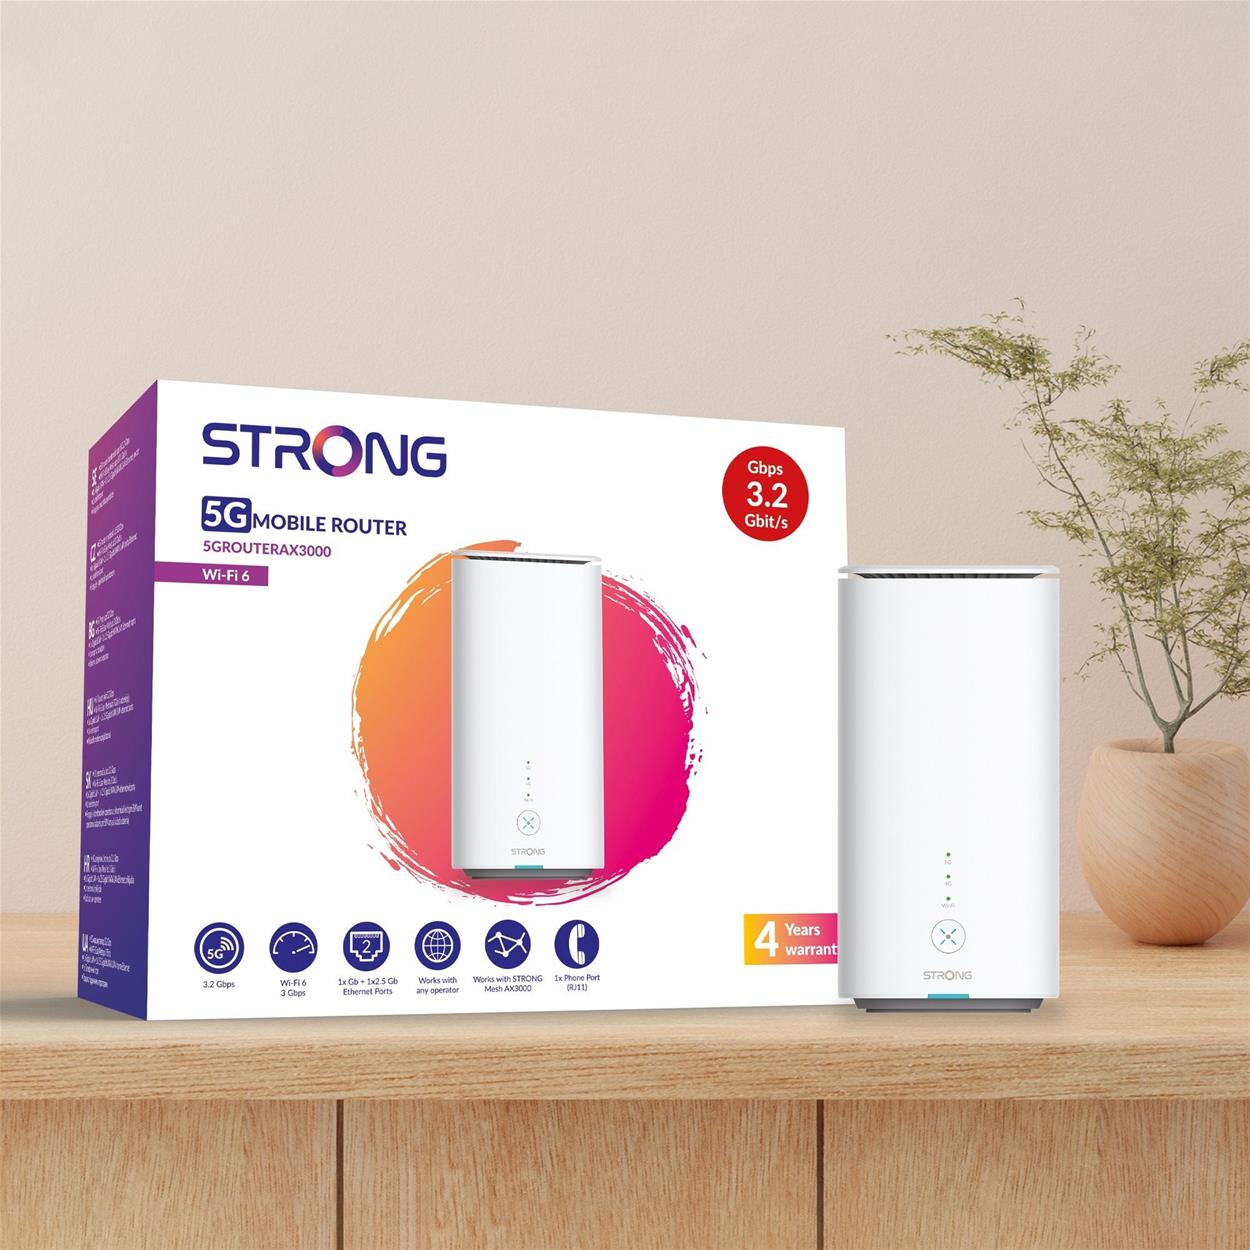 Wi-FI router STRONG 5GROUTERAX3000